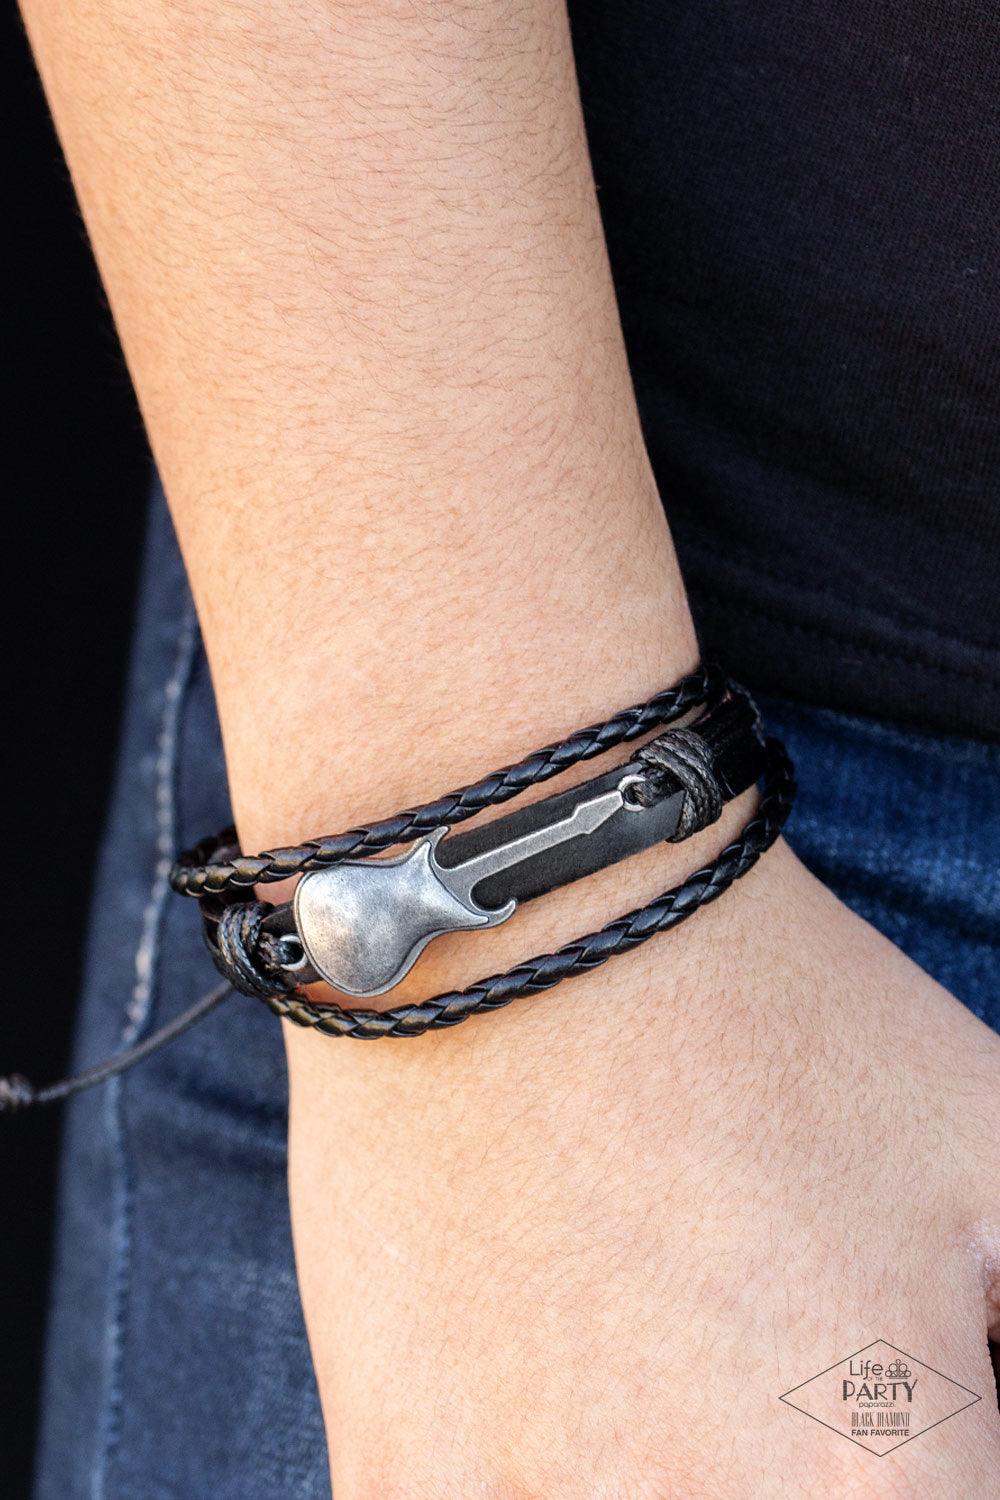 Paparazzi Accessories Lead Guitar - Black Two strands of braided leather cording join a rustic black leather band around the wrist. Shiny black cording wraps around a metallic guitar charm, knotting the centerpiece in place for an urban finish. Features a